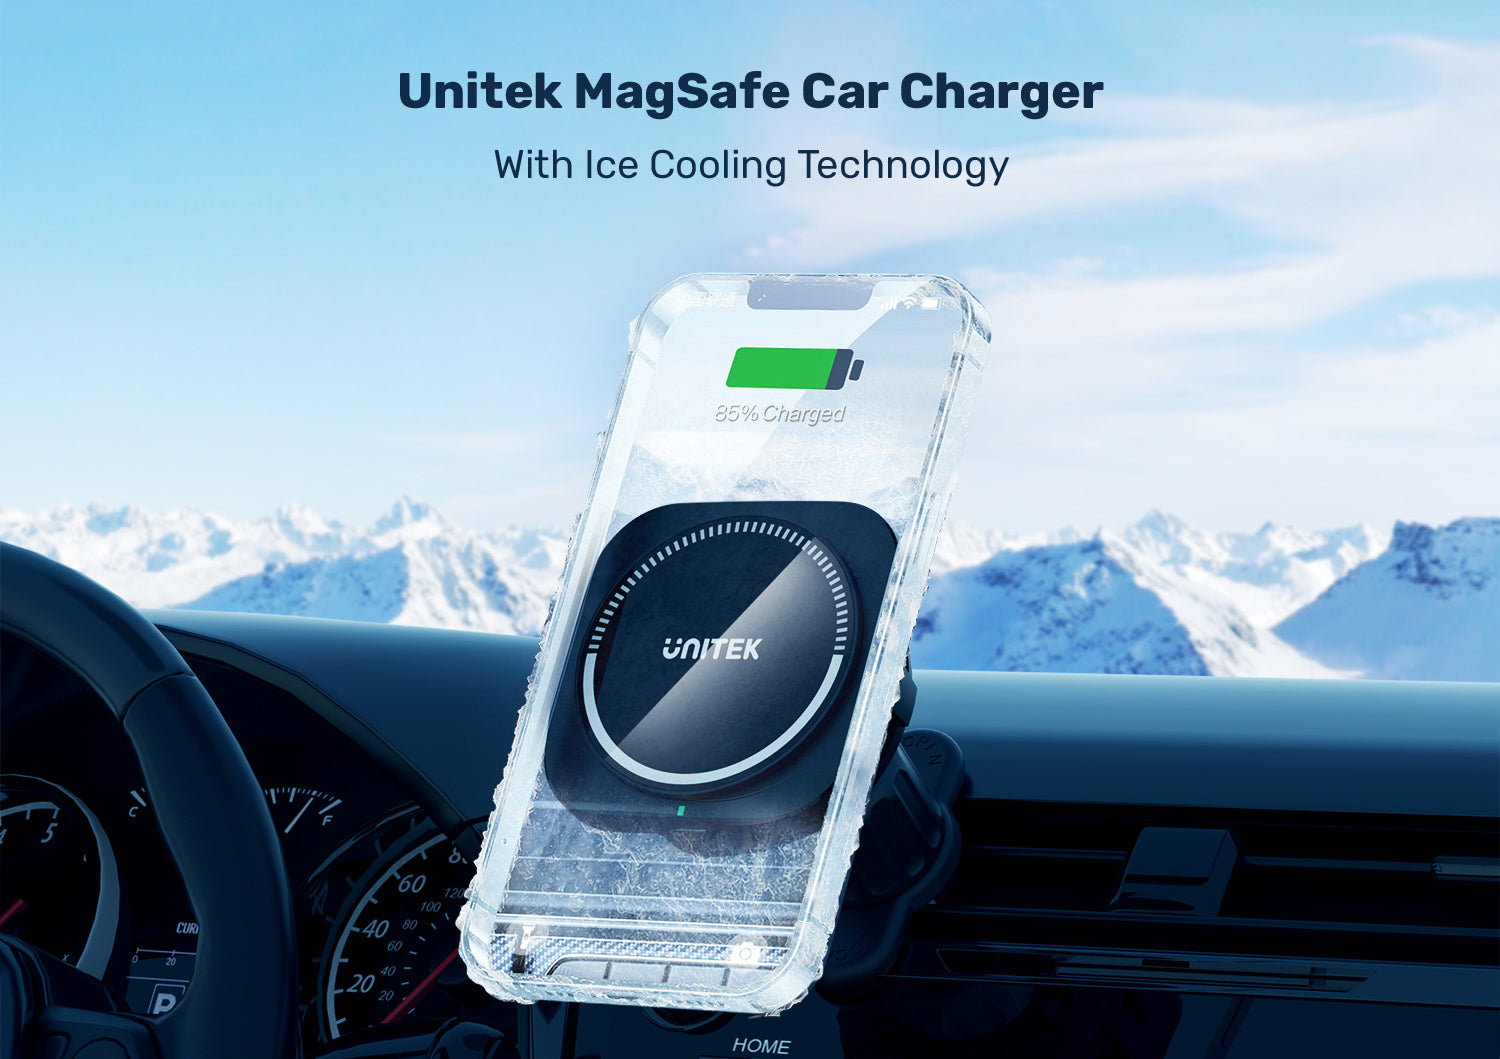 MagSafe Car Mount Charger 15W Wireless Phone Car Charger Mount